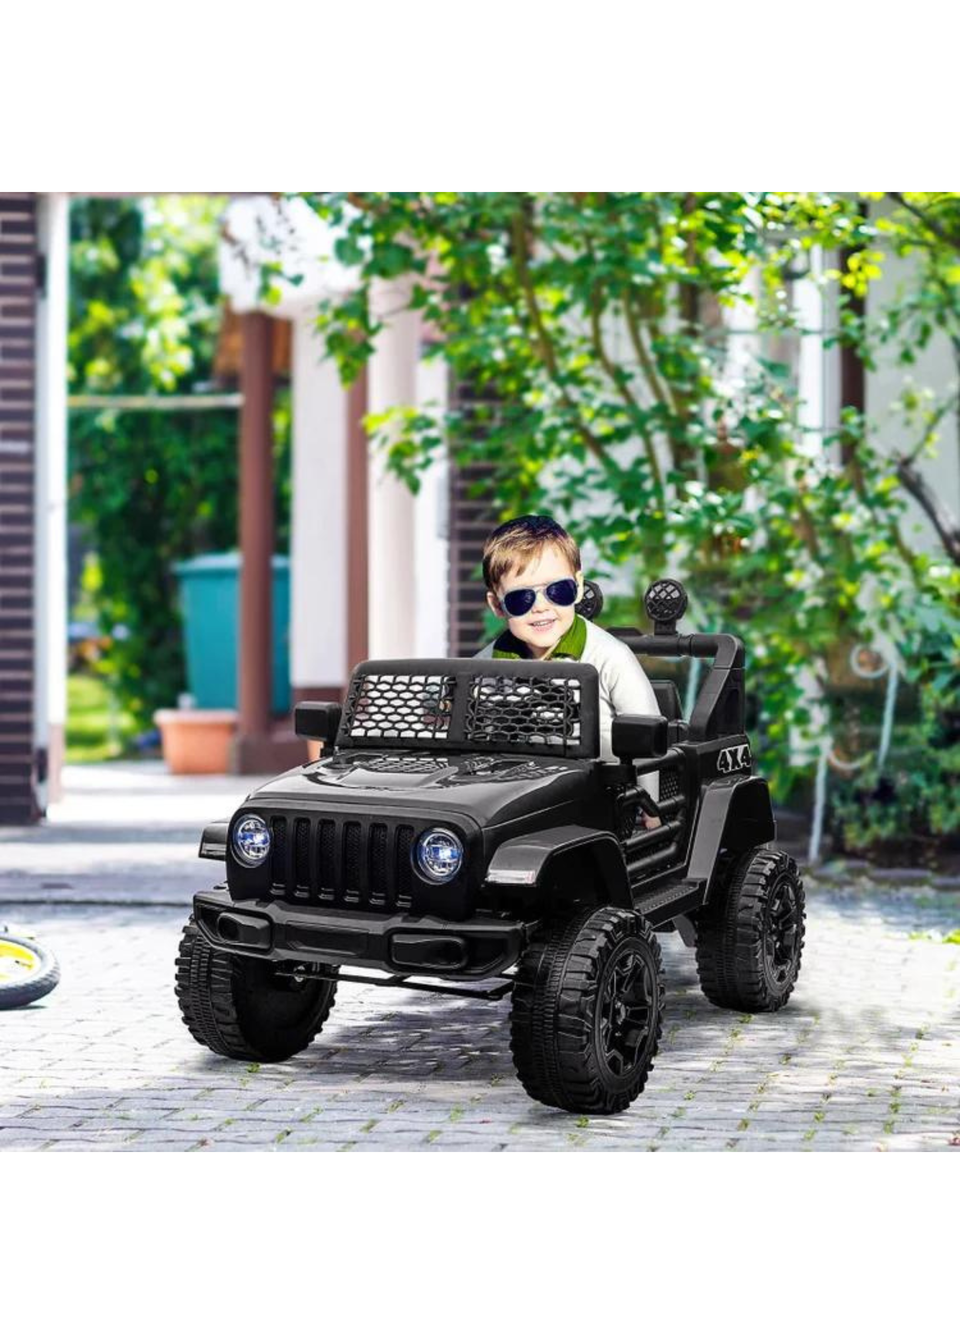 HOMCOM 12V Kids Electric Ride On Car Truck Off-road Toy with Remote Control (Black)